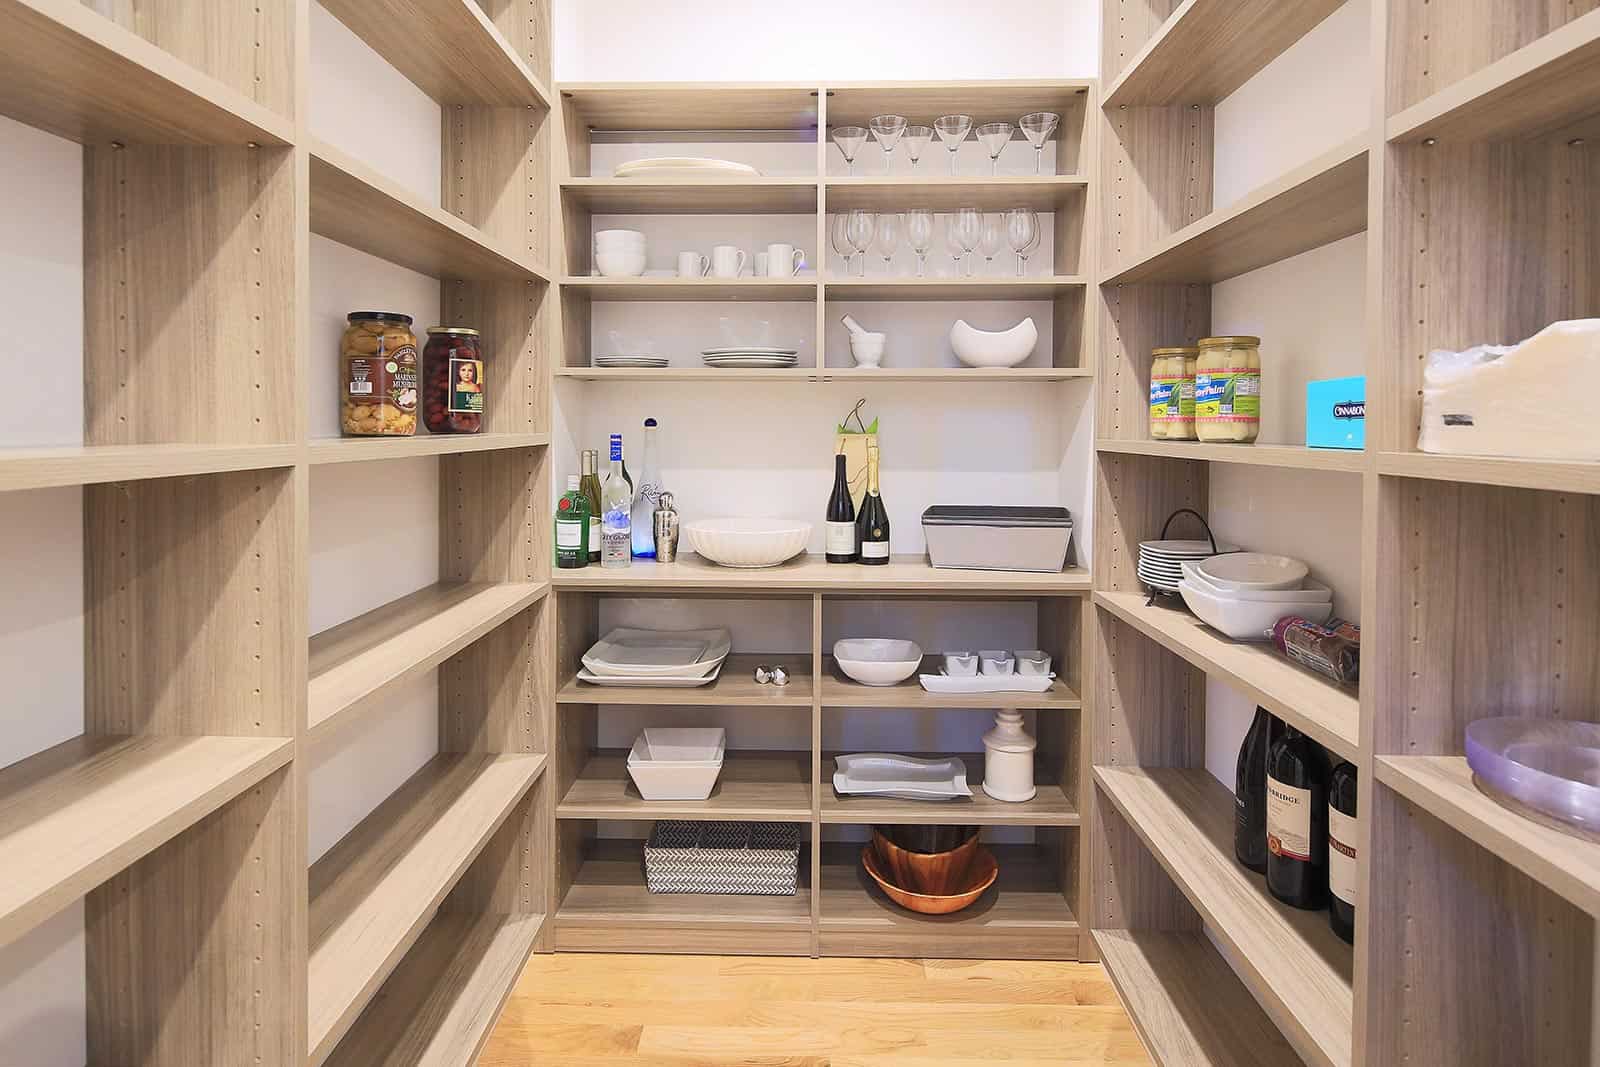 Pantry Shelving: Maximizing Space and Functionality